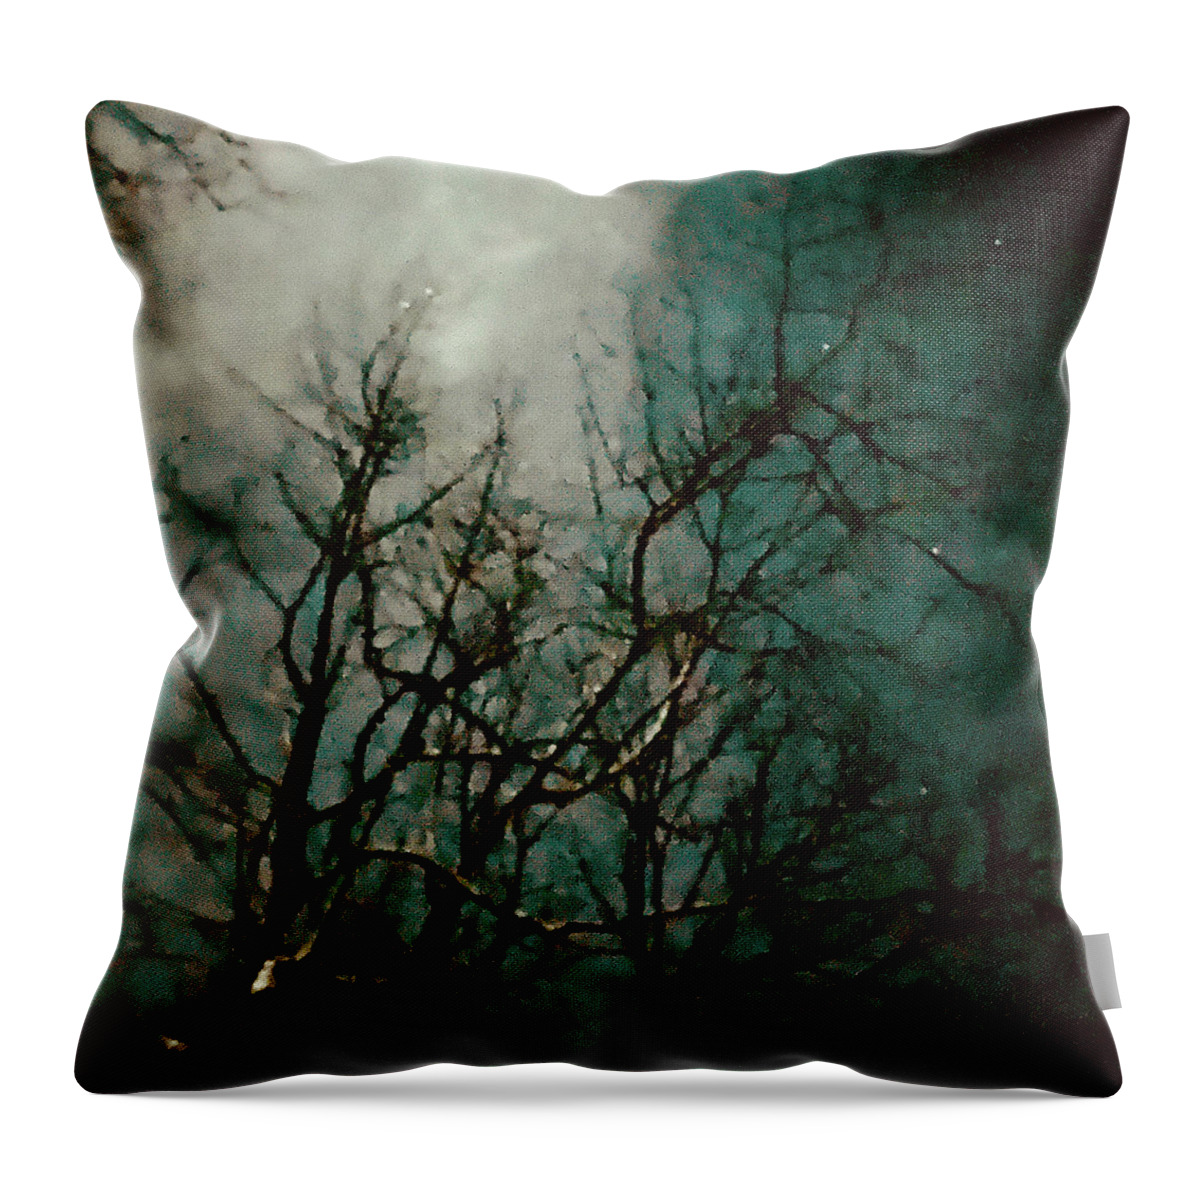 Buffy The Vampire Slayer Throw Pillow featuring the photograph Notwithstanding by Nicholas Brendon